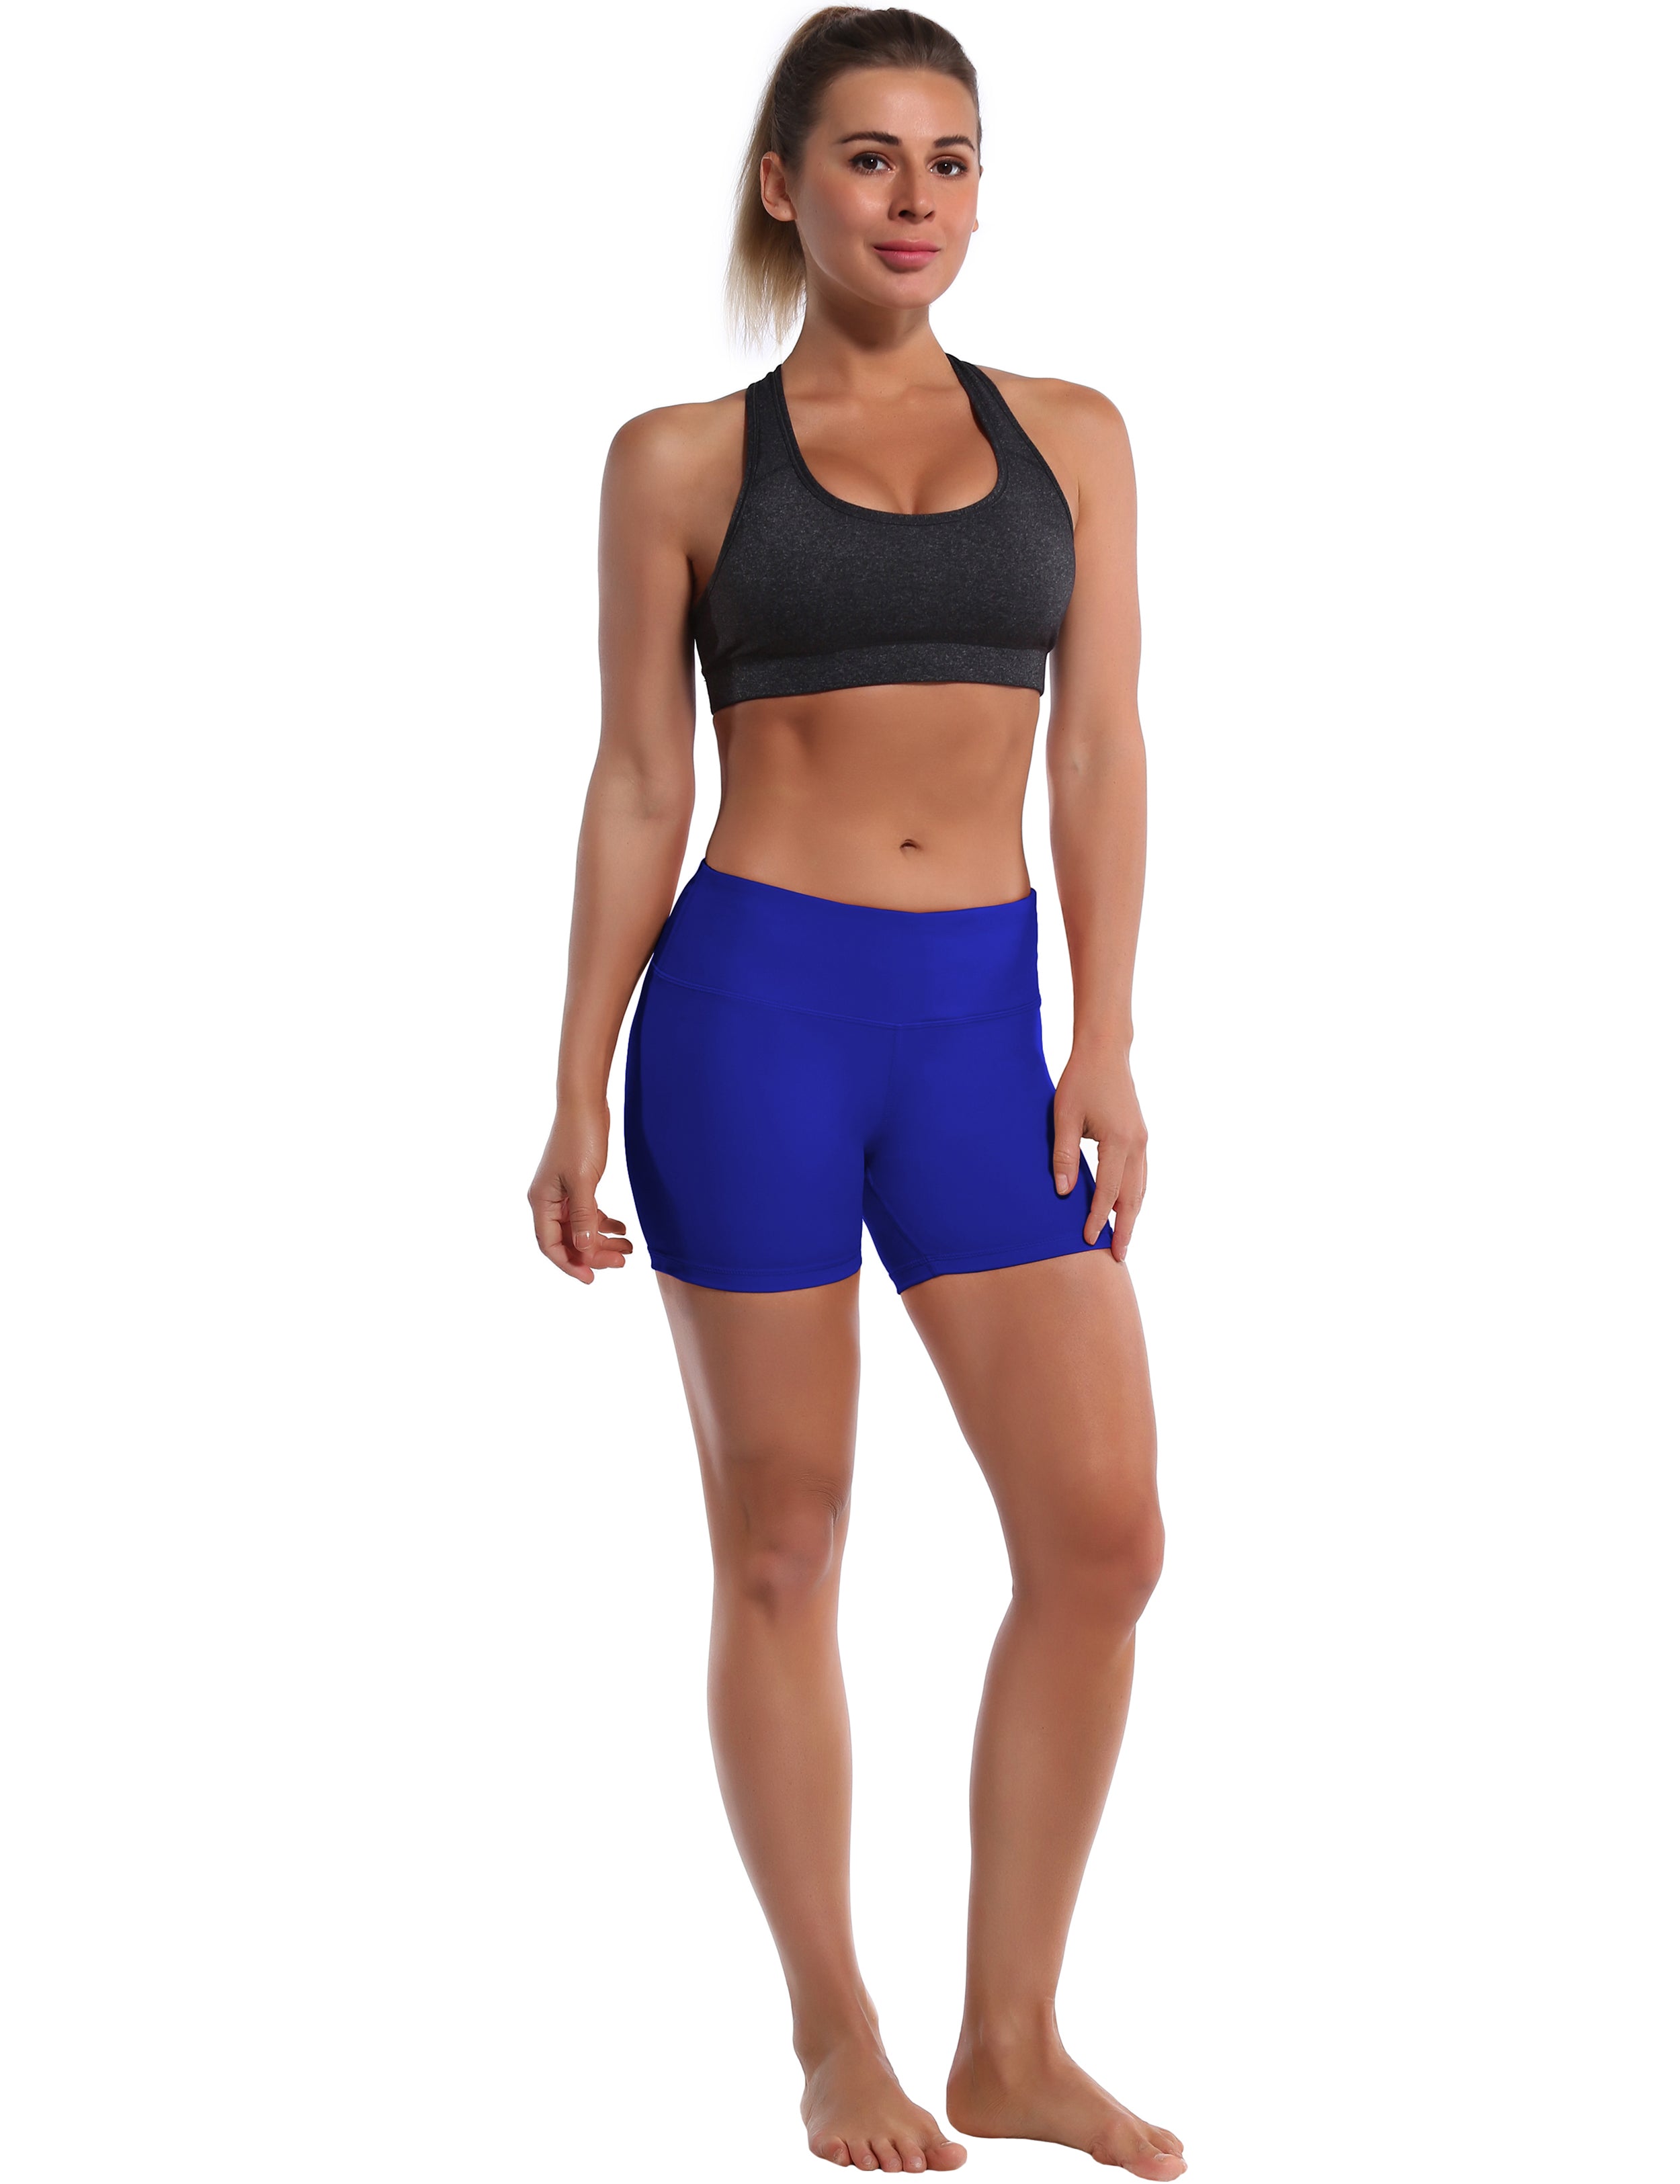 4" Biking Shorts navy Sleek, soft, smooth and totally comfortable: our newest style is here. Softest-ever fabric High elasticity High density 4-way stretch Fabric doesn't attract lint easily No see-through Moisture-wicking Machine wash 75% Nylon, 25% Spandex